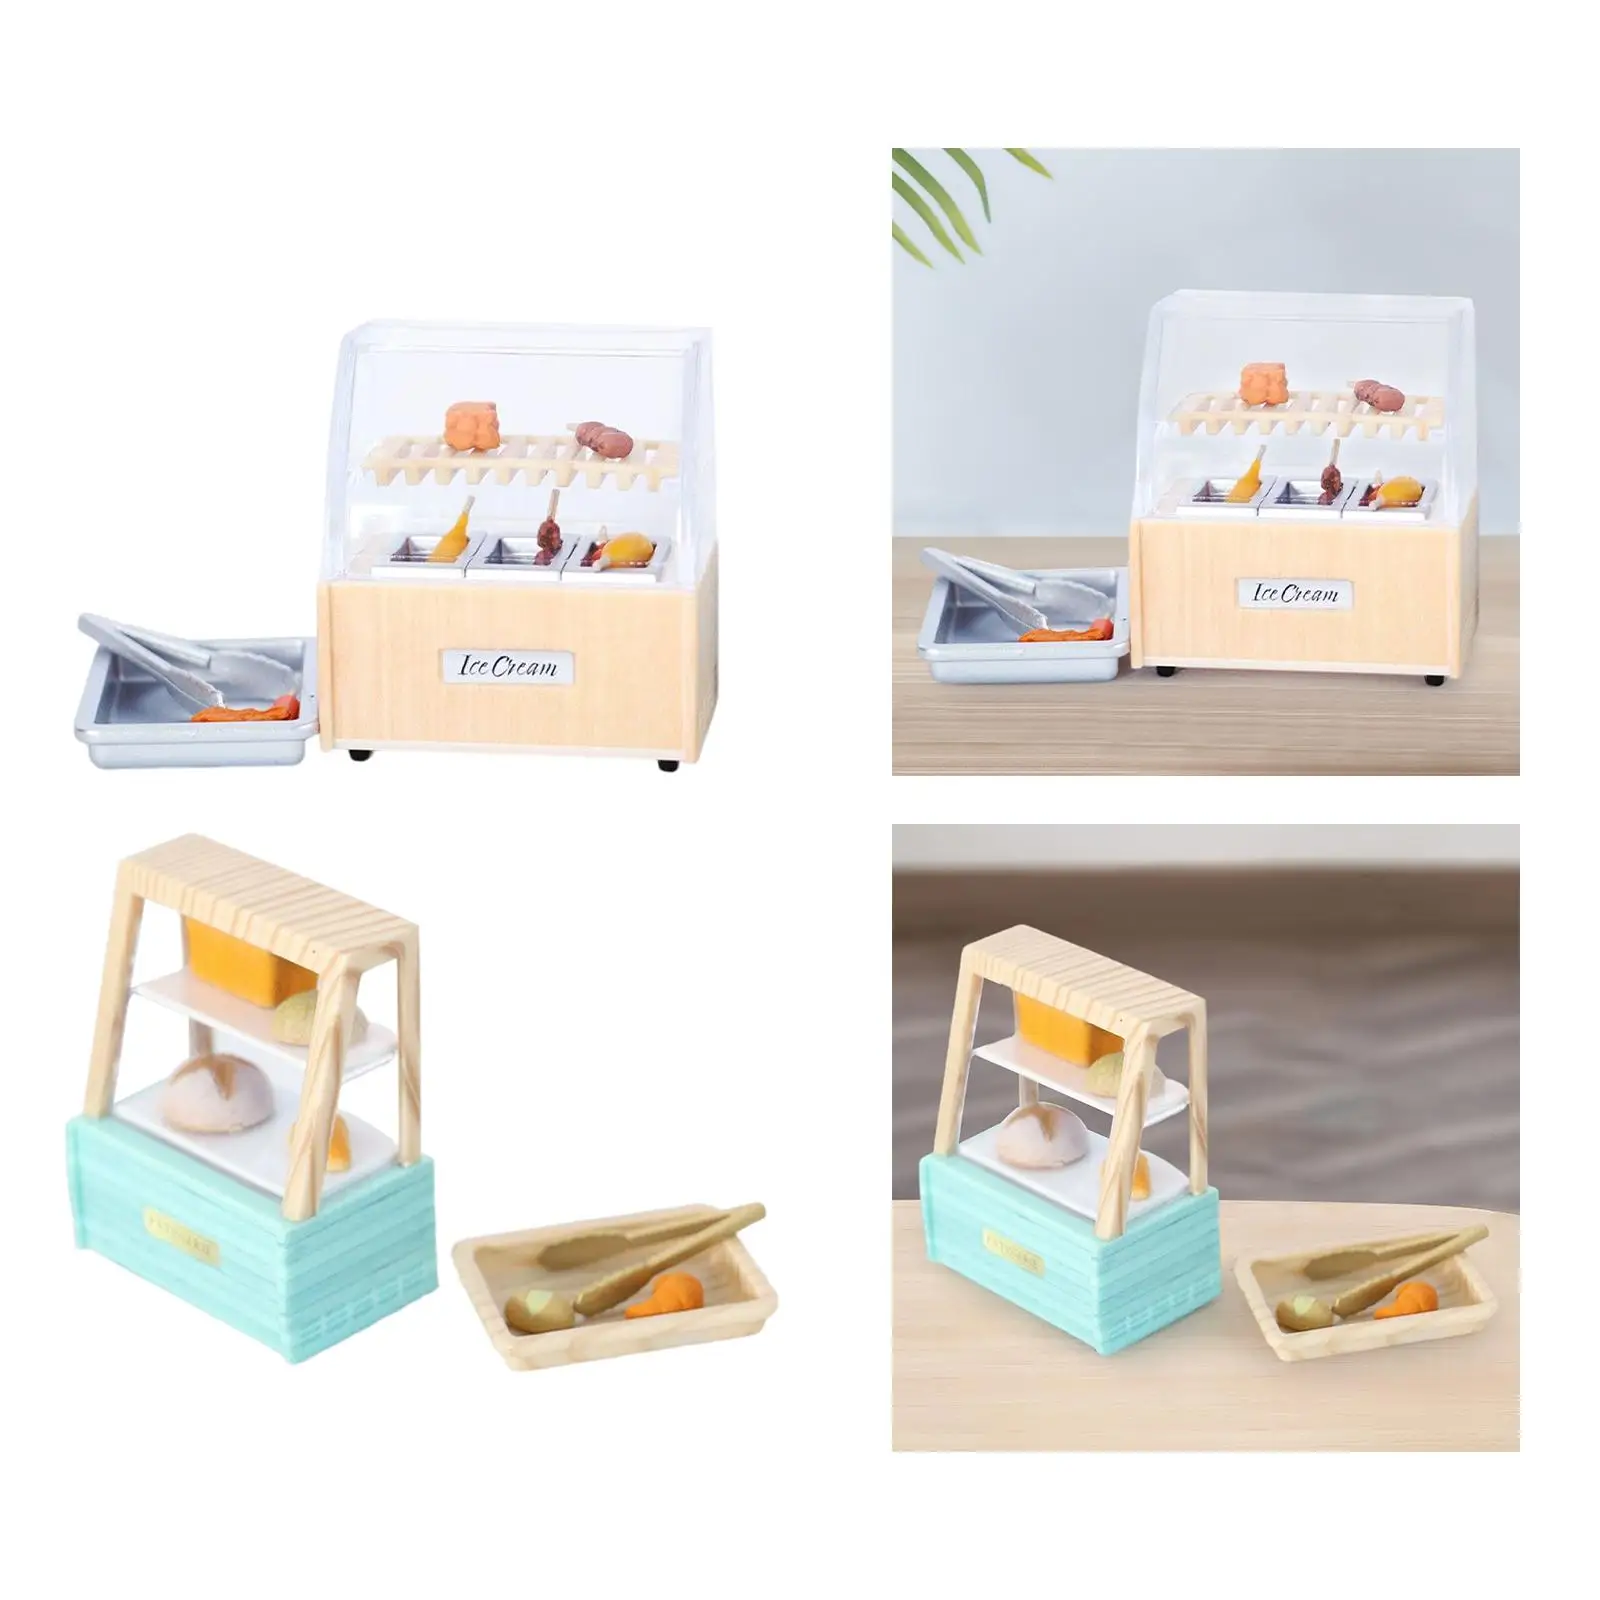 1:12 Scale Dollhouse Shop Cabinet Dollhouse Decoration Simulated Furniture Model DIY Projects for Children Birthday Gifts